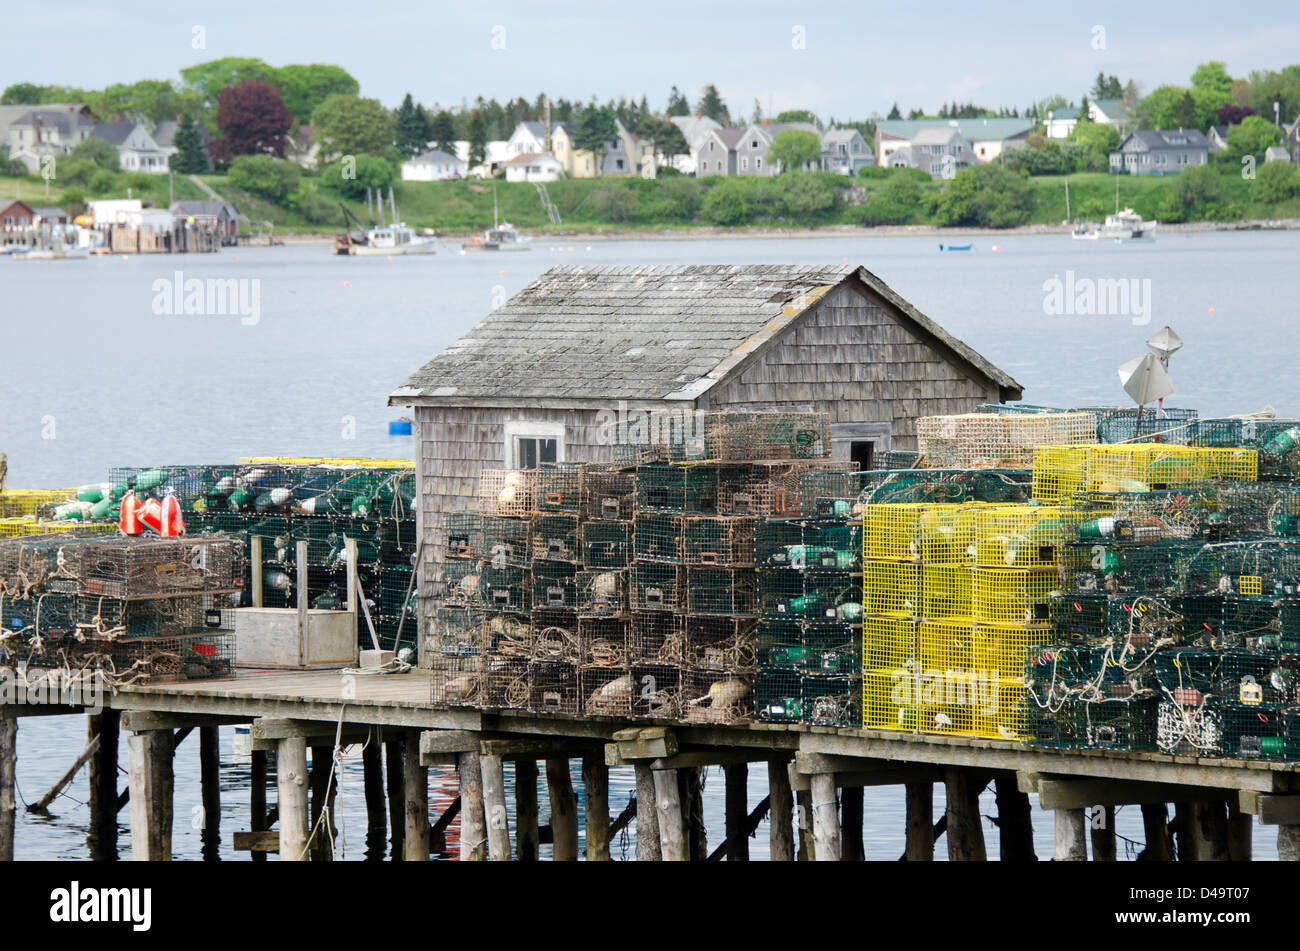 A fishing shack on Beals Island, Maine is walled in by piles of lobster traps. The town of Jonesport is visible across the bay. Stock Photo